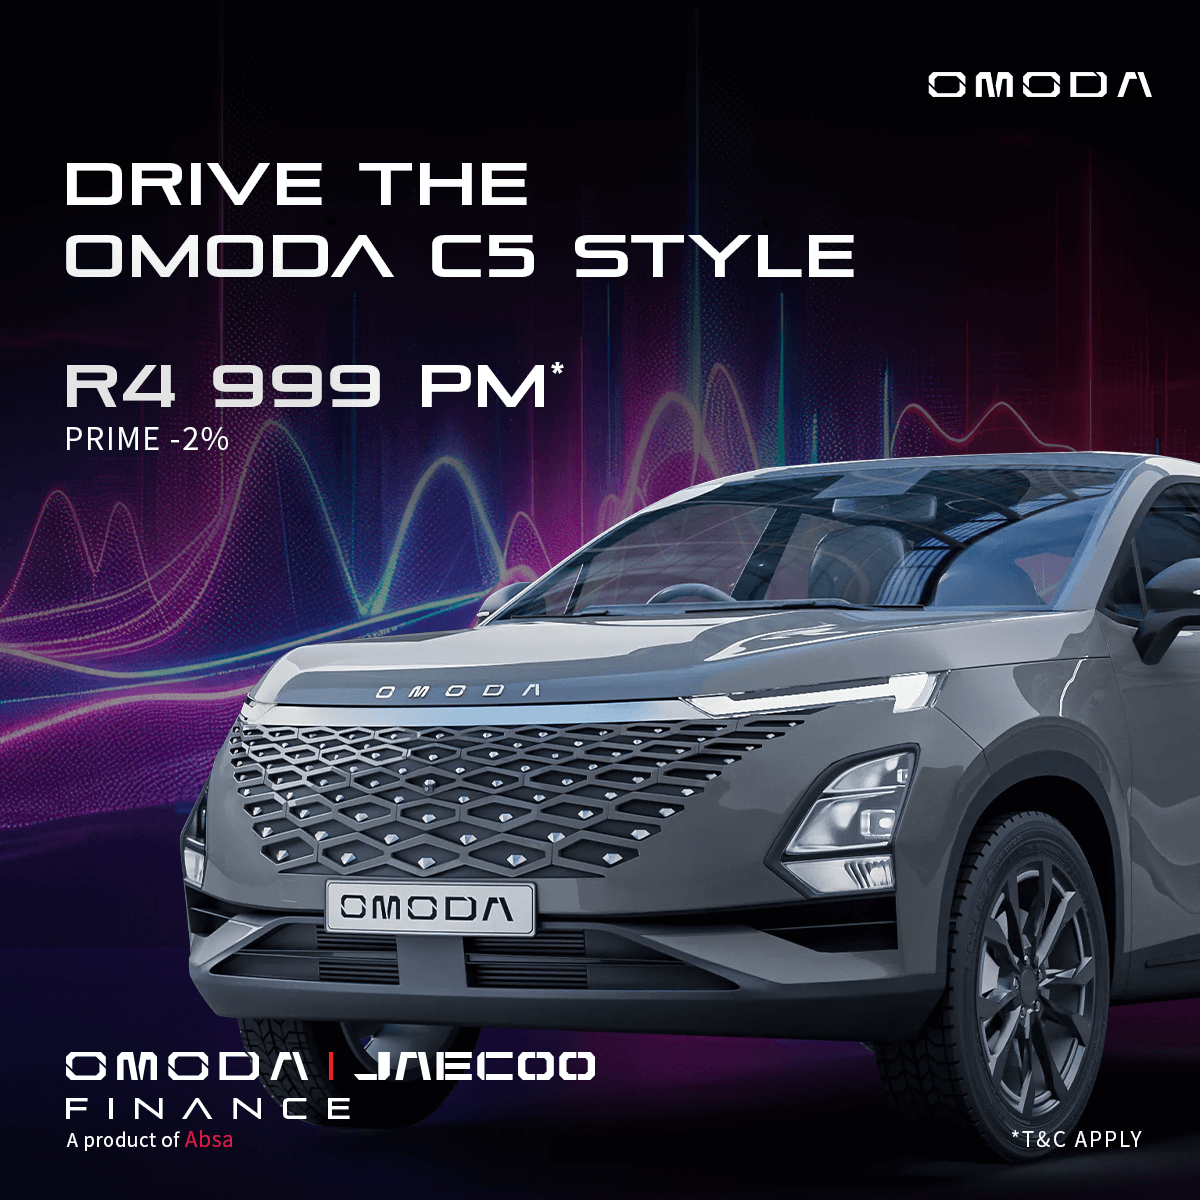 Omoda C5 Style Special Offer